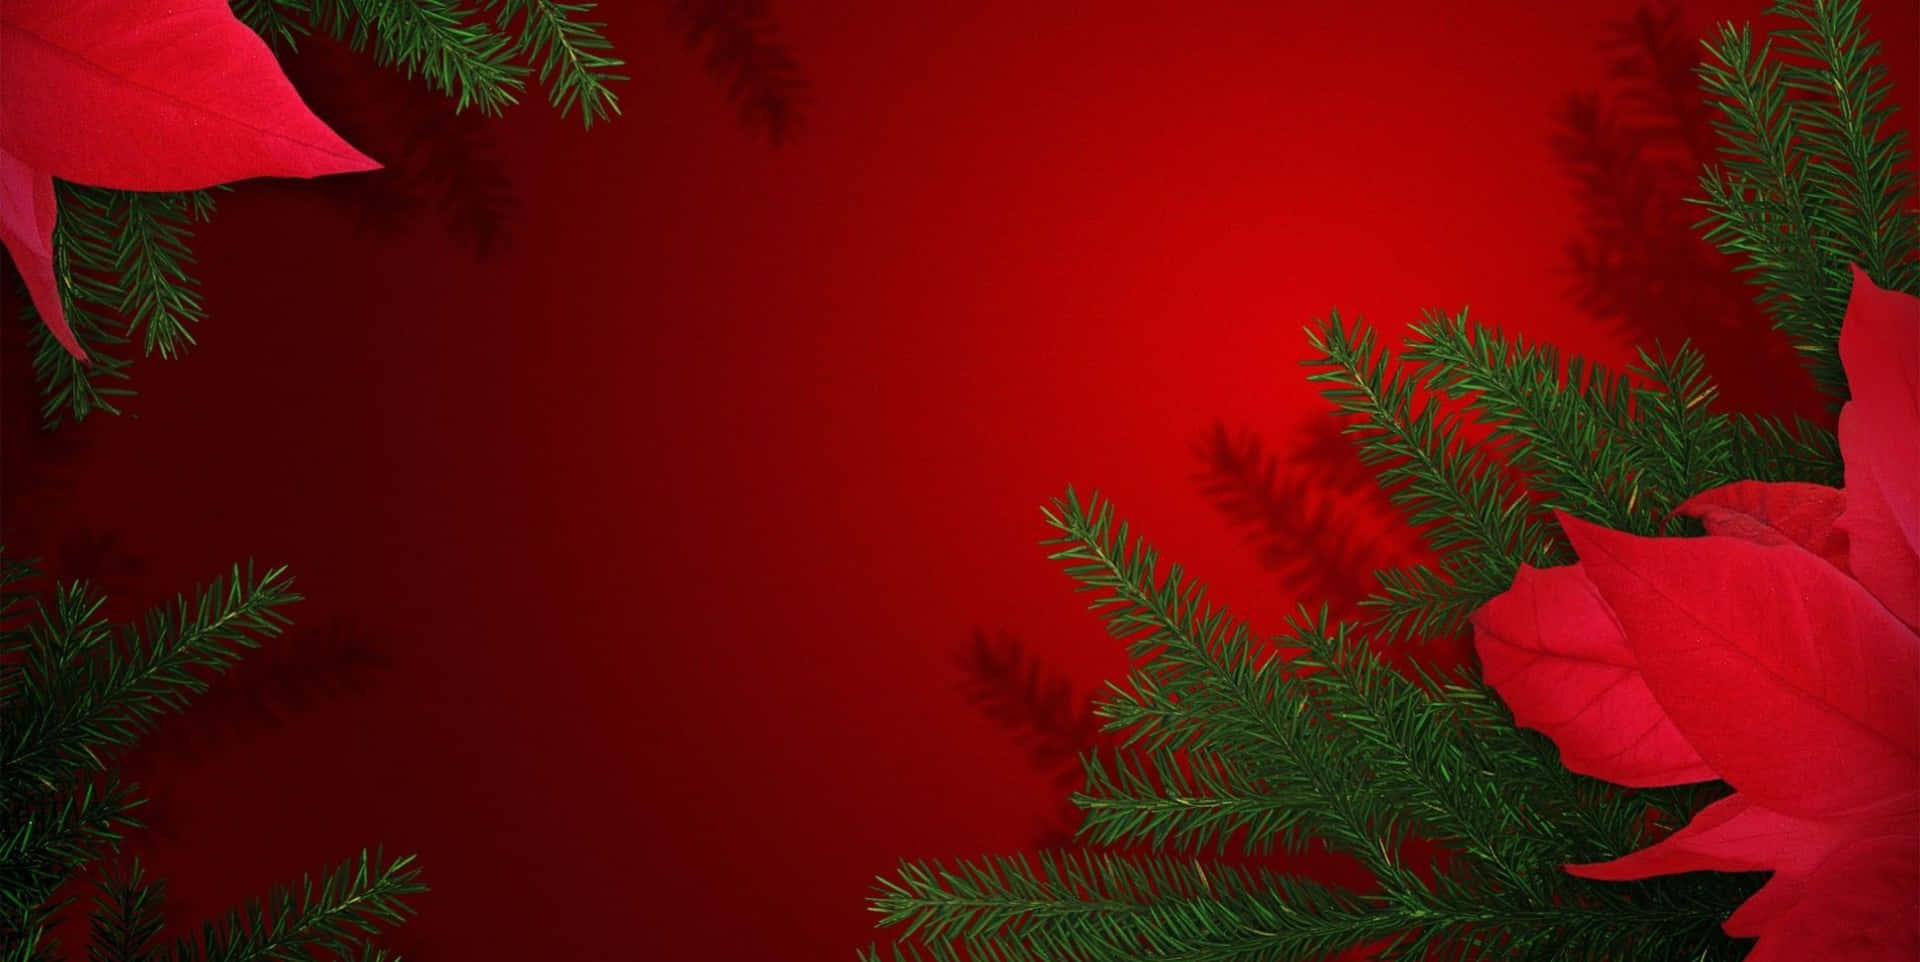 "A festive Christmas tree with vibrant red and green decorations" Wallpaper